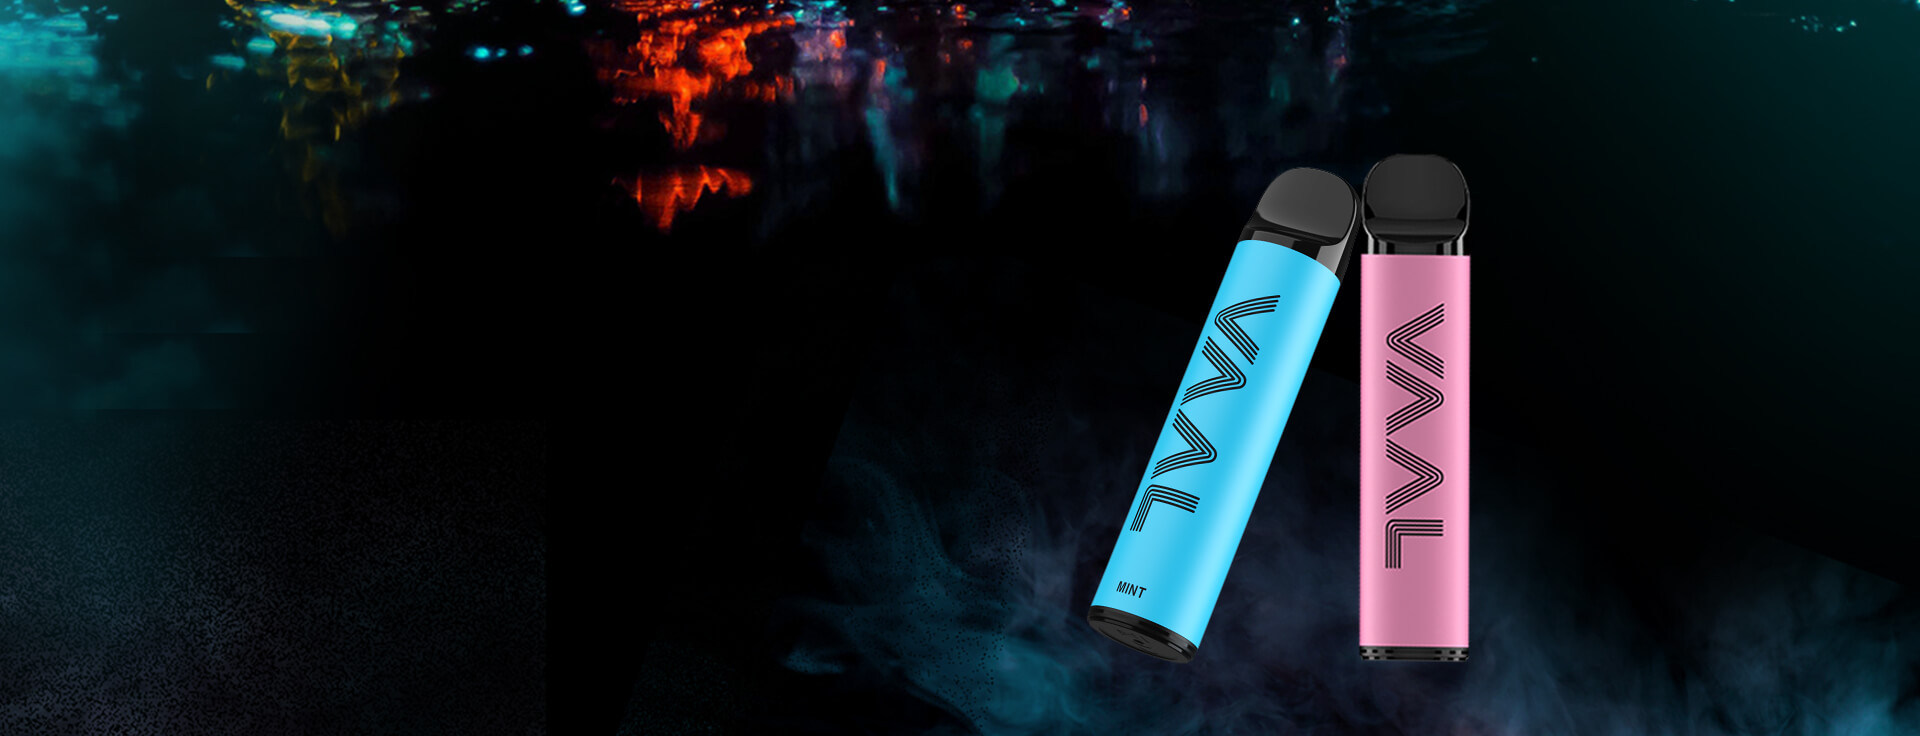 Specification of the vaal 800 disposable vape: 400mAh built-in battery, 1.2ohm regular coil, 2ml e-liquid capacity, 17mg nicotine salt, up to 800 puffs